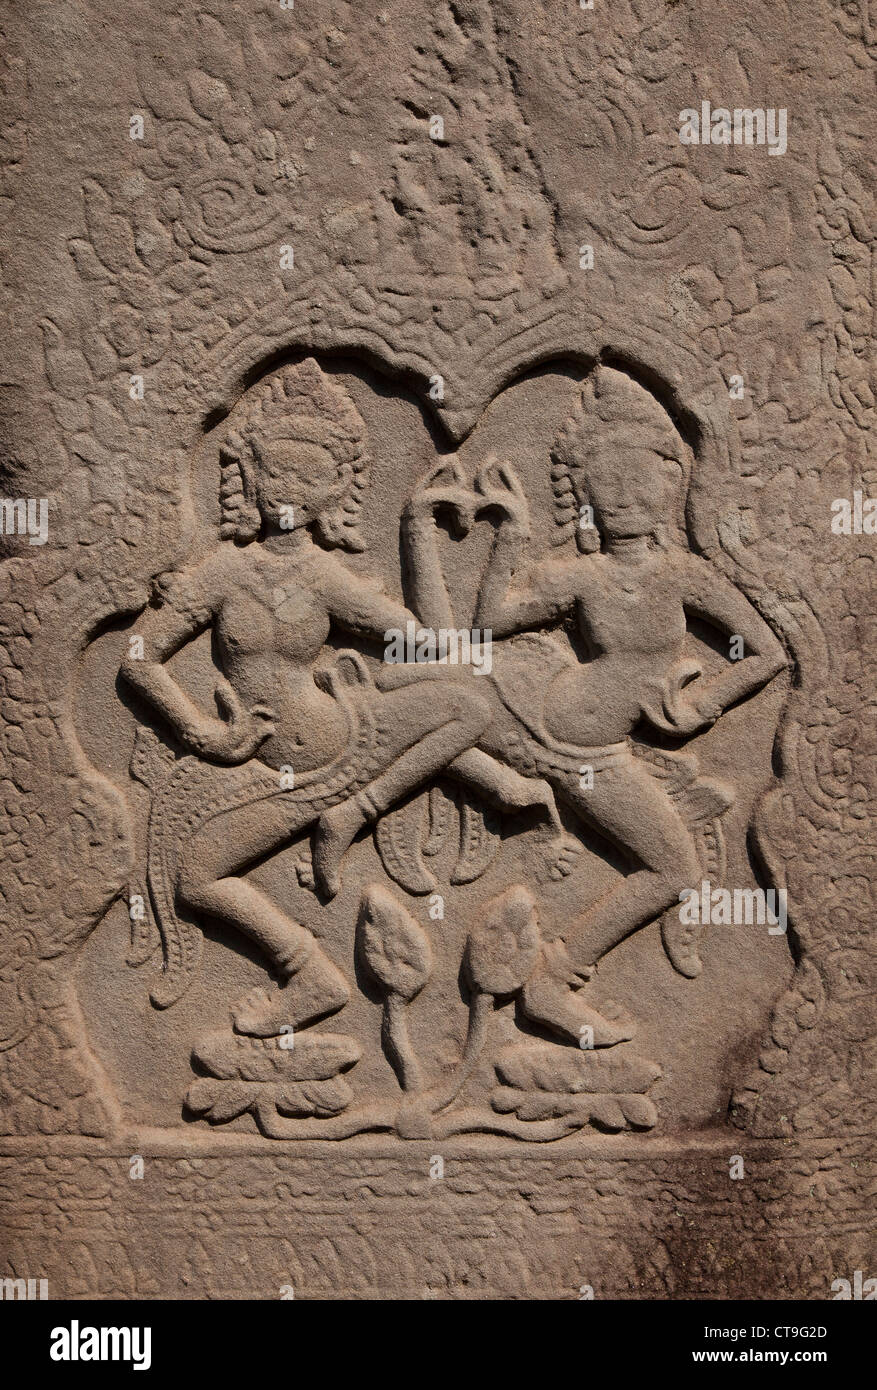 Stone Khmer wall carvings of dancers on sandstone, Angkor Wat, Cambodia Stock Photo